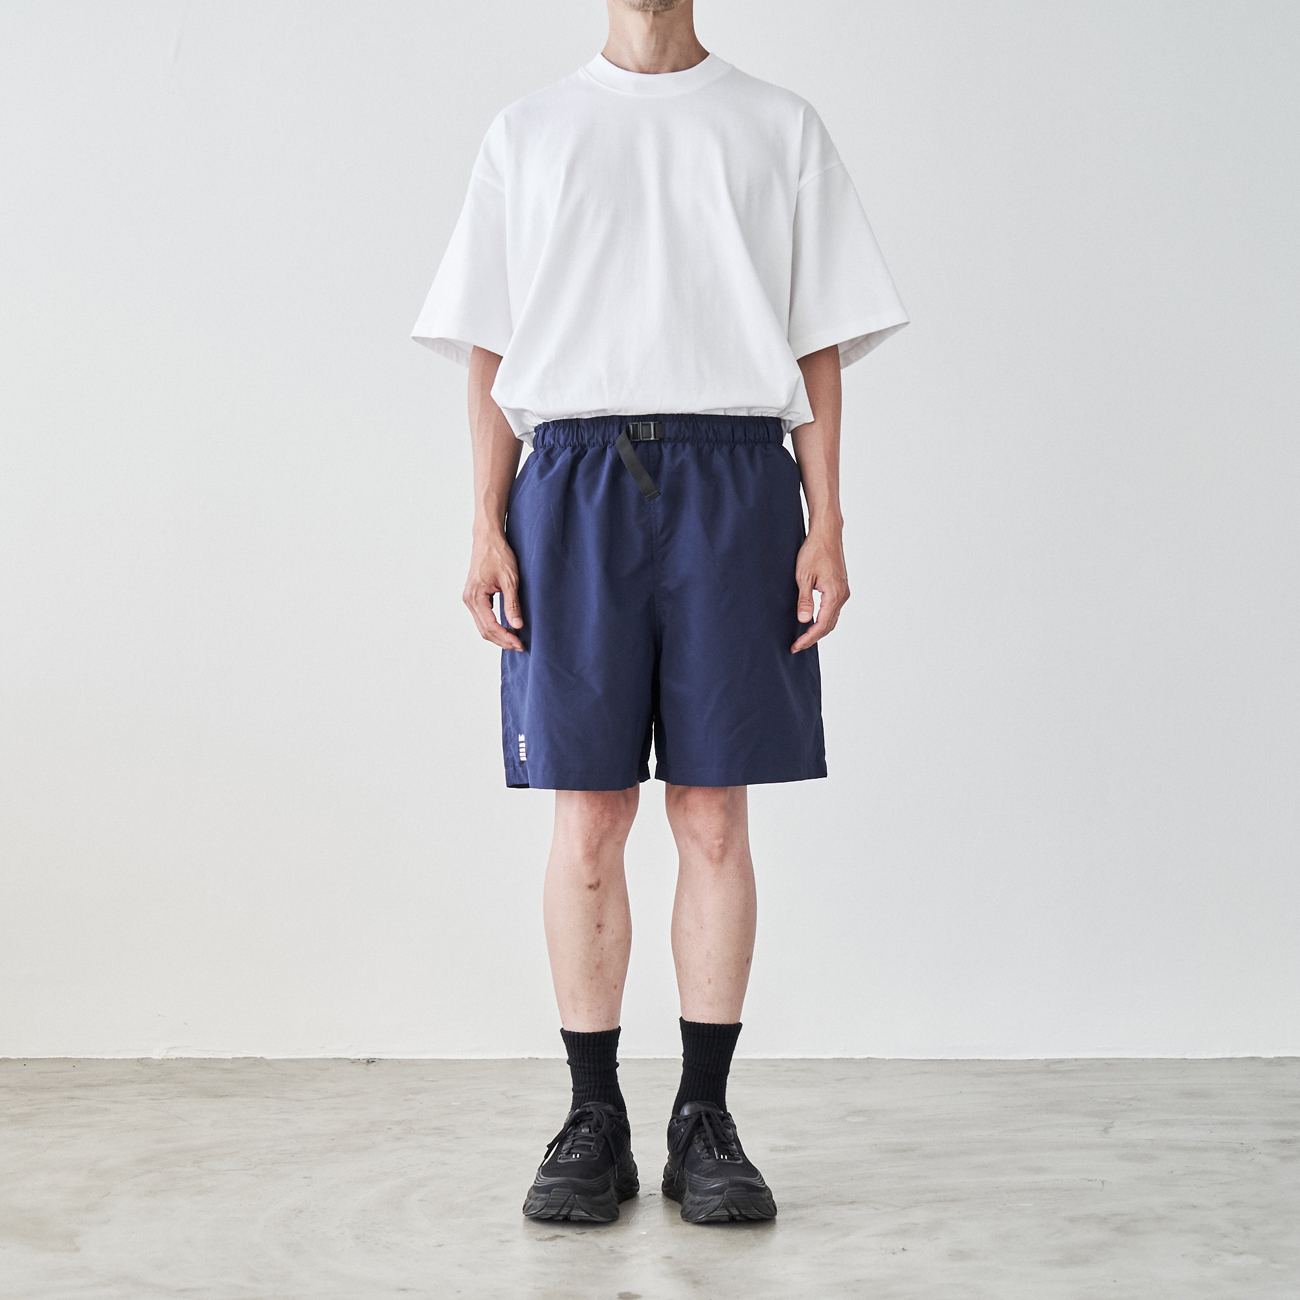 freshservice all weather shorts NAVY